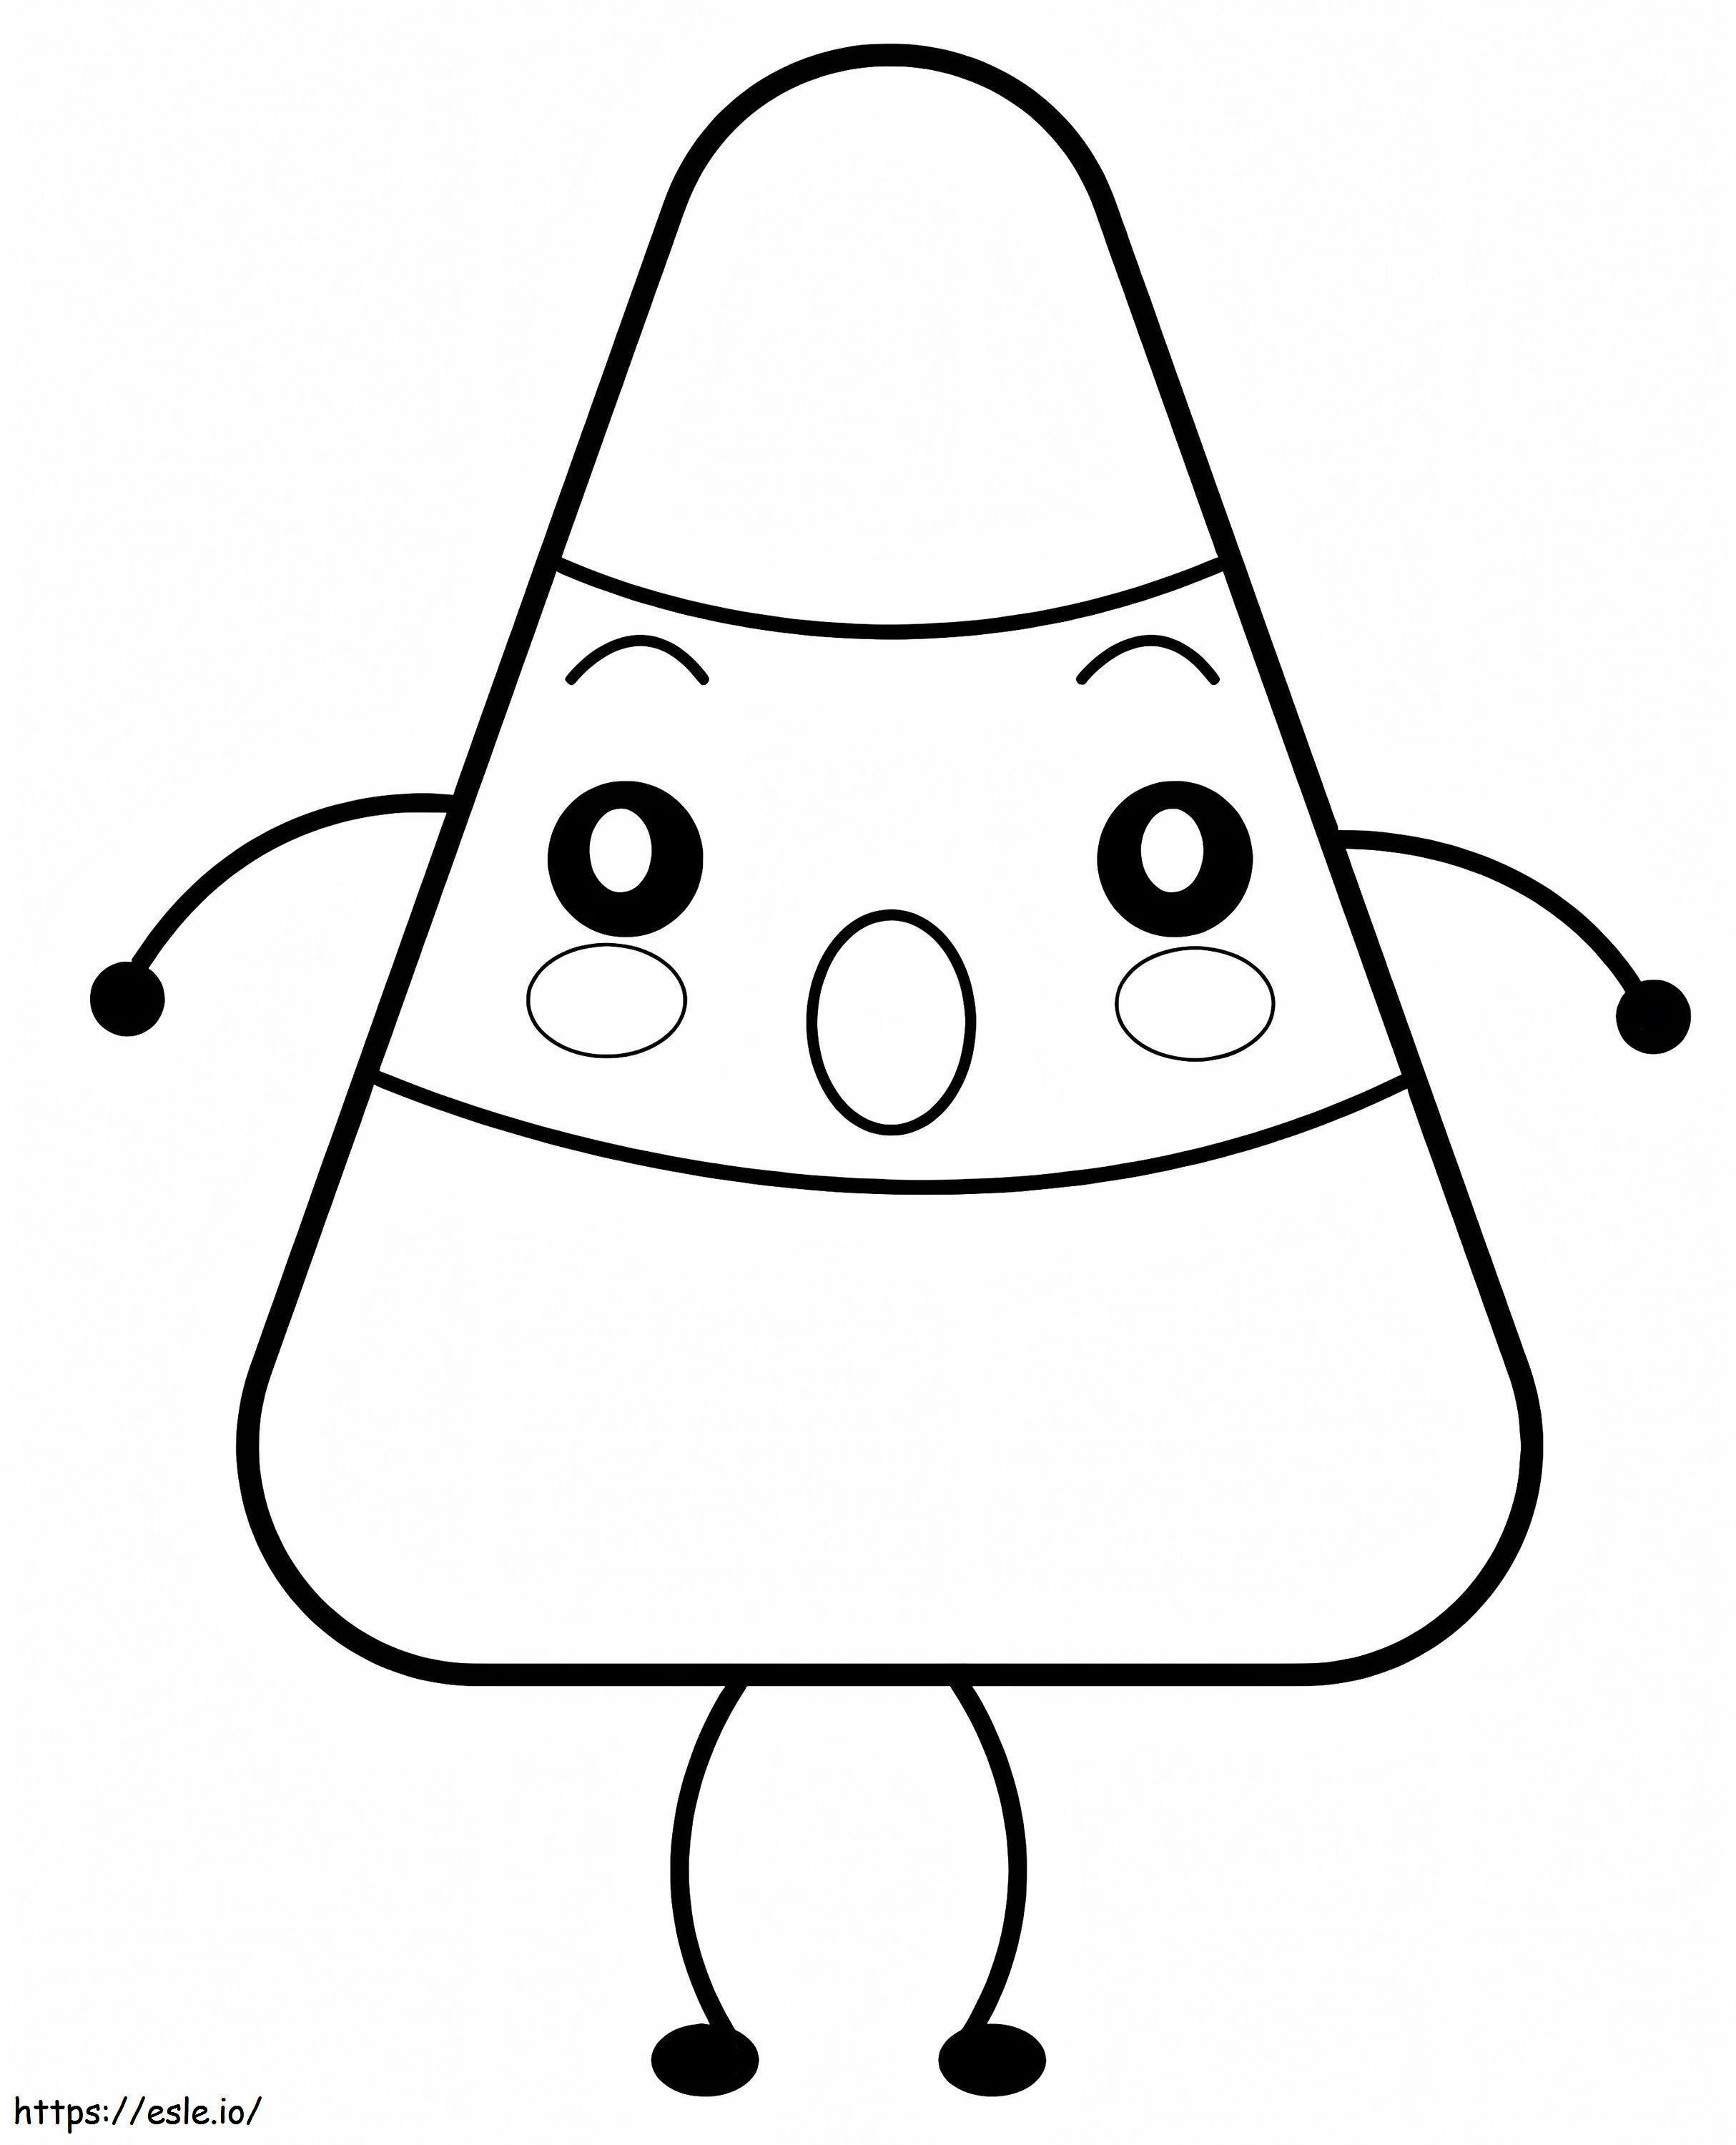 Surprised Candy Corn coloring page